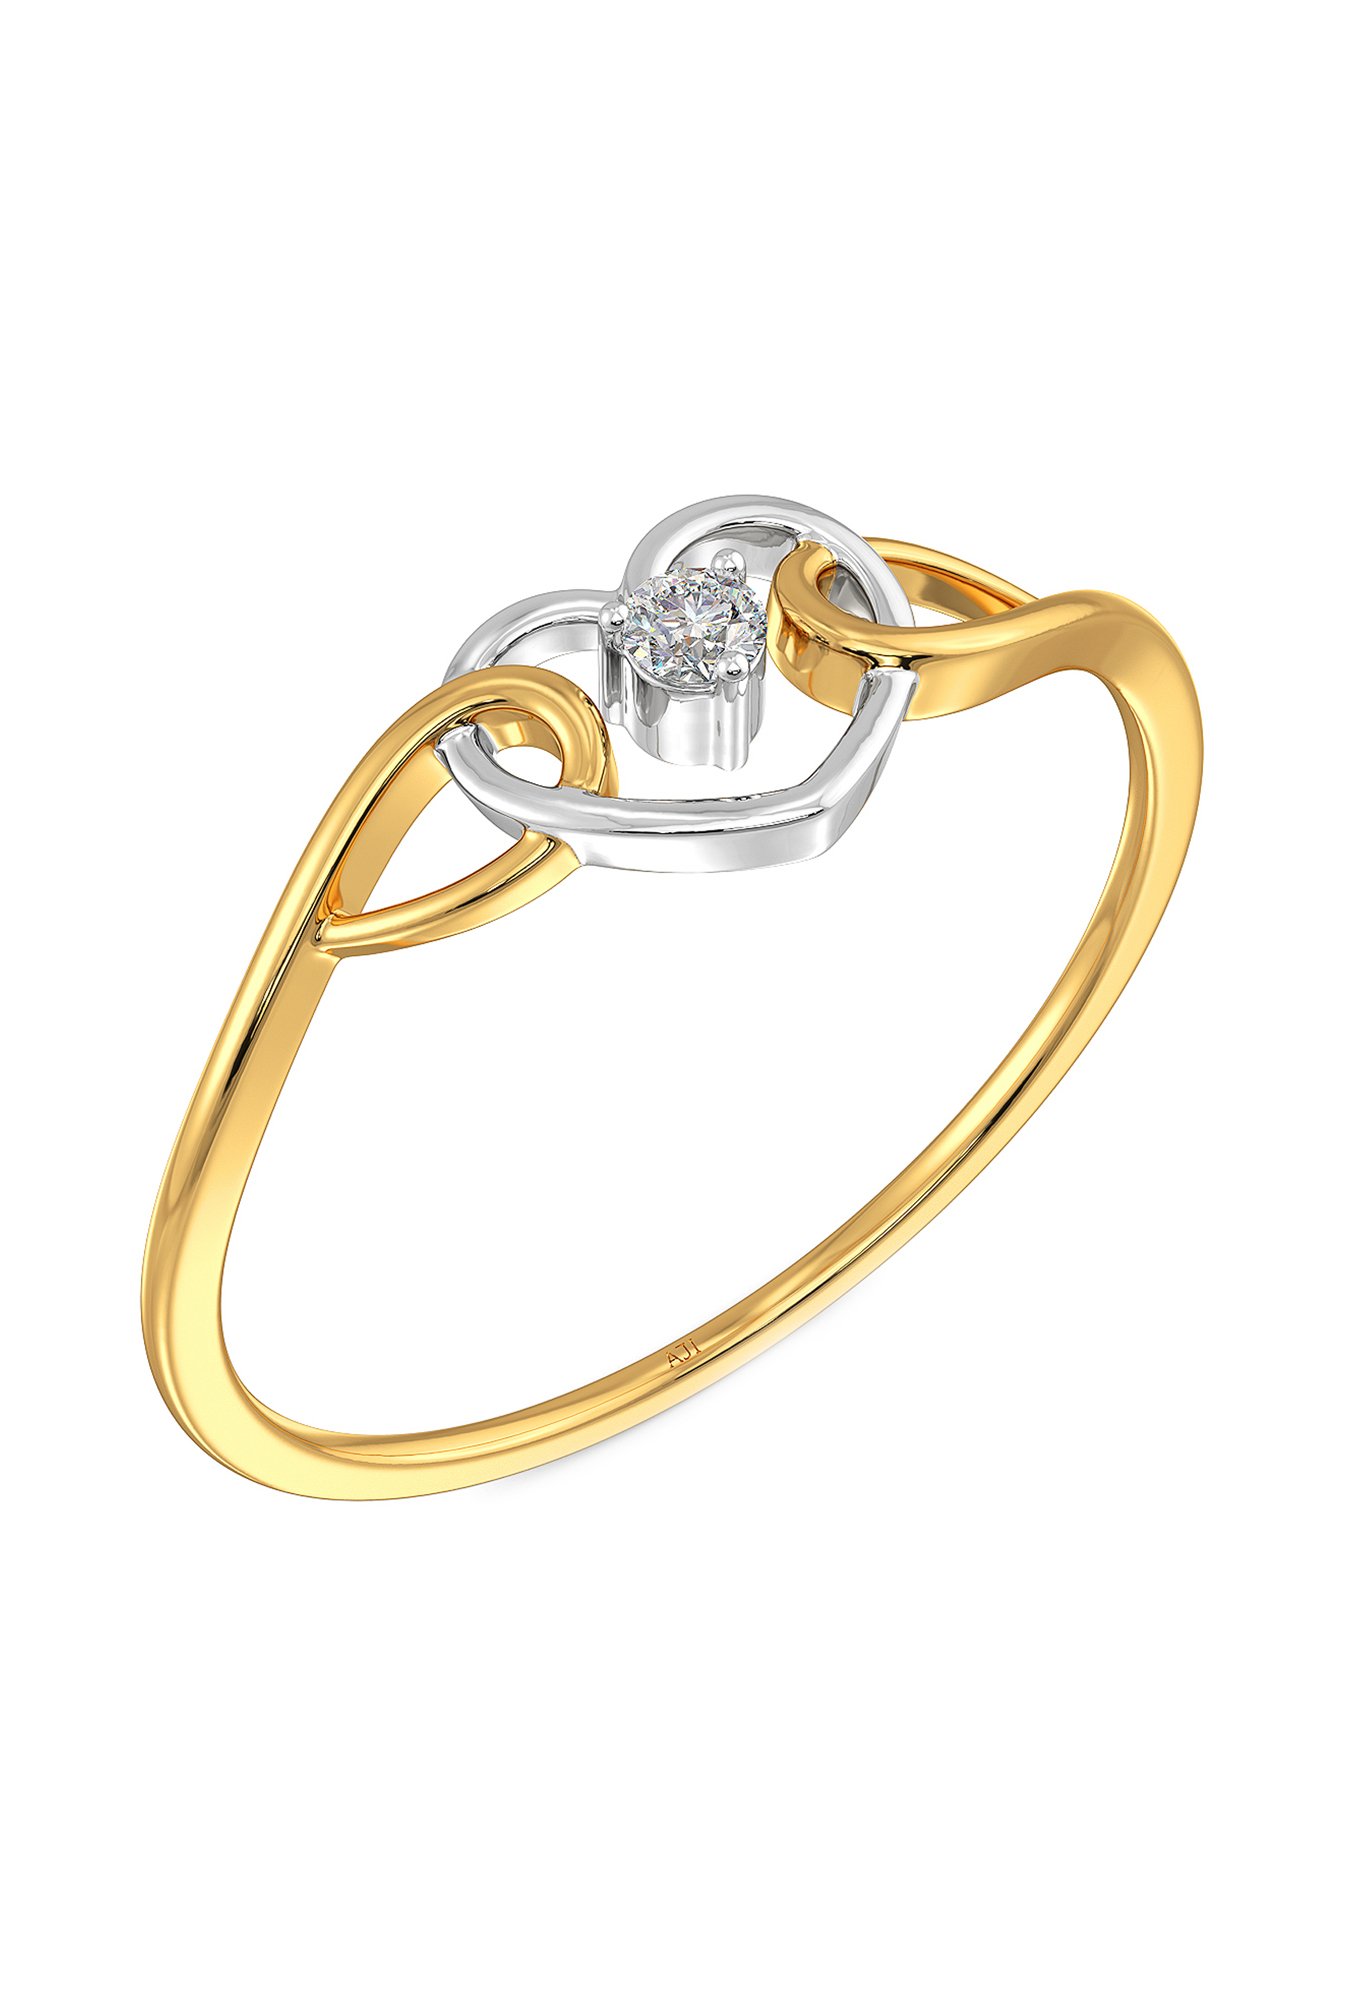 Simple Style Joyalukkas Couple Gold Rings Personality Gold Silver Plated  With Star Jewelry Supply From Zeimax, $7.64 | DHgate.Com